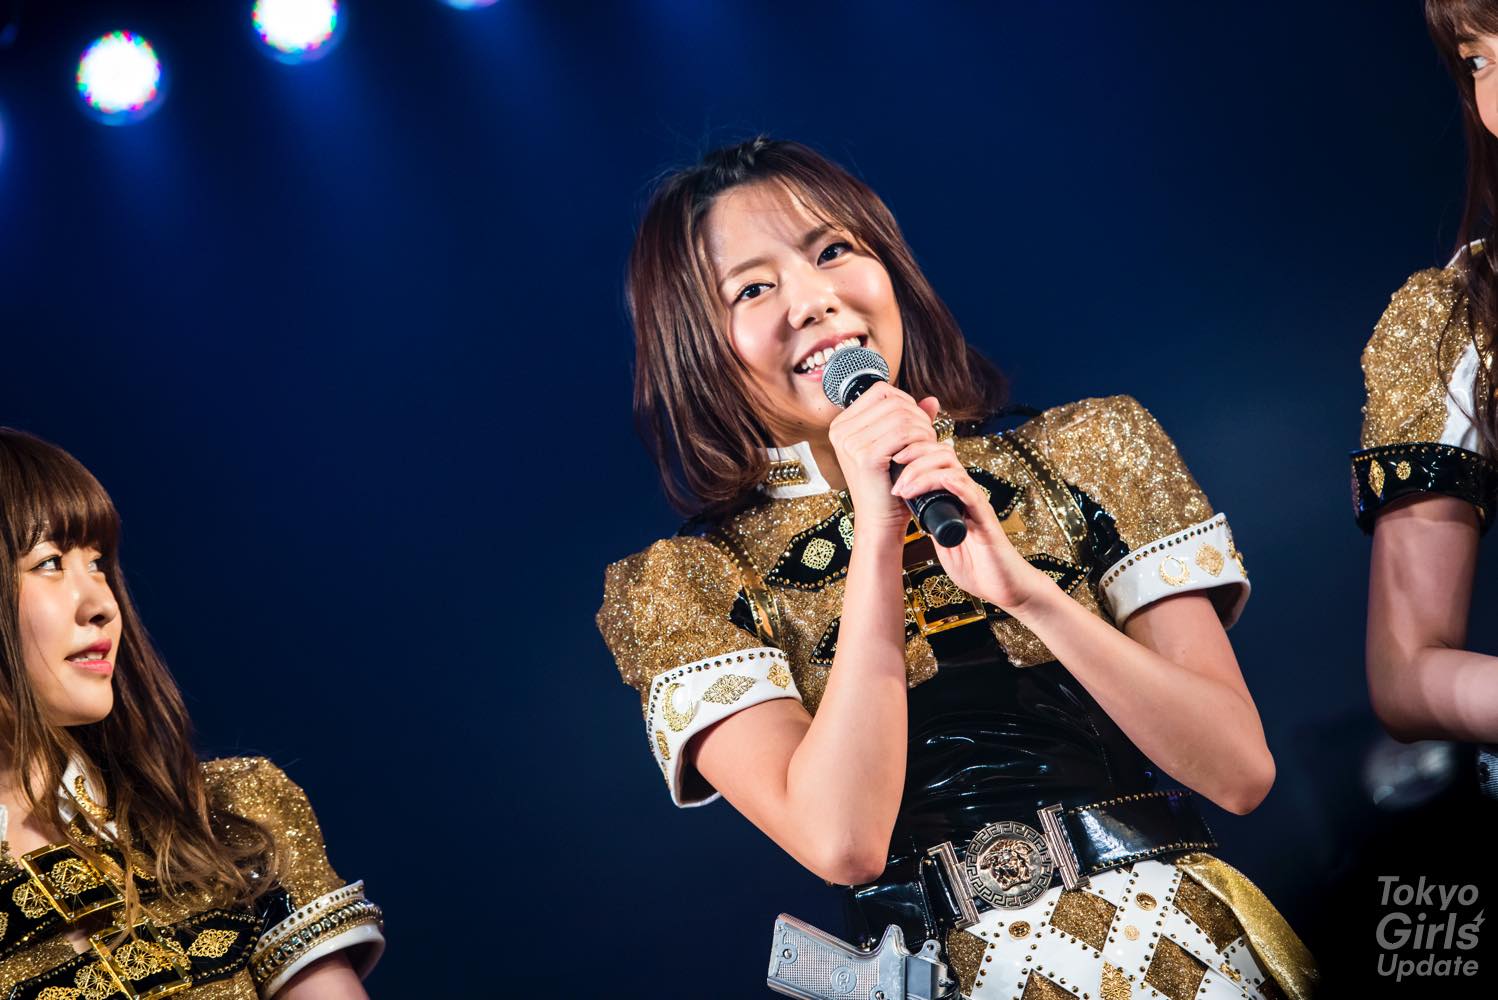 Mariko Nakamura to Graduate from AKB48 in March, Become TV Announcer in April!